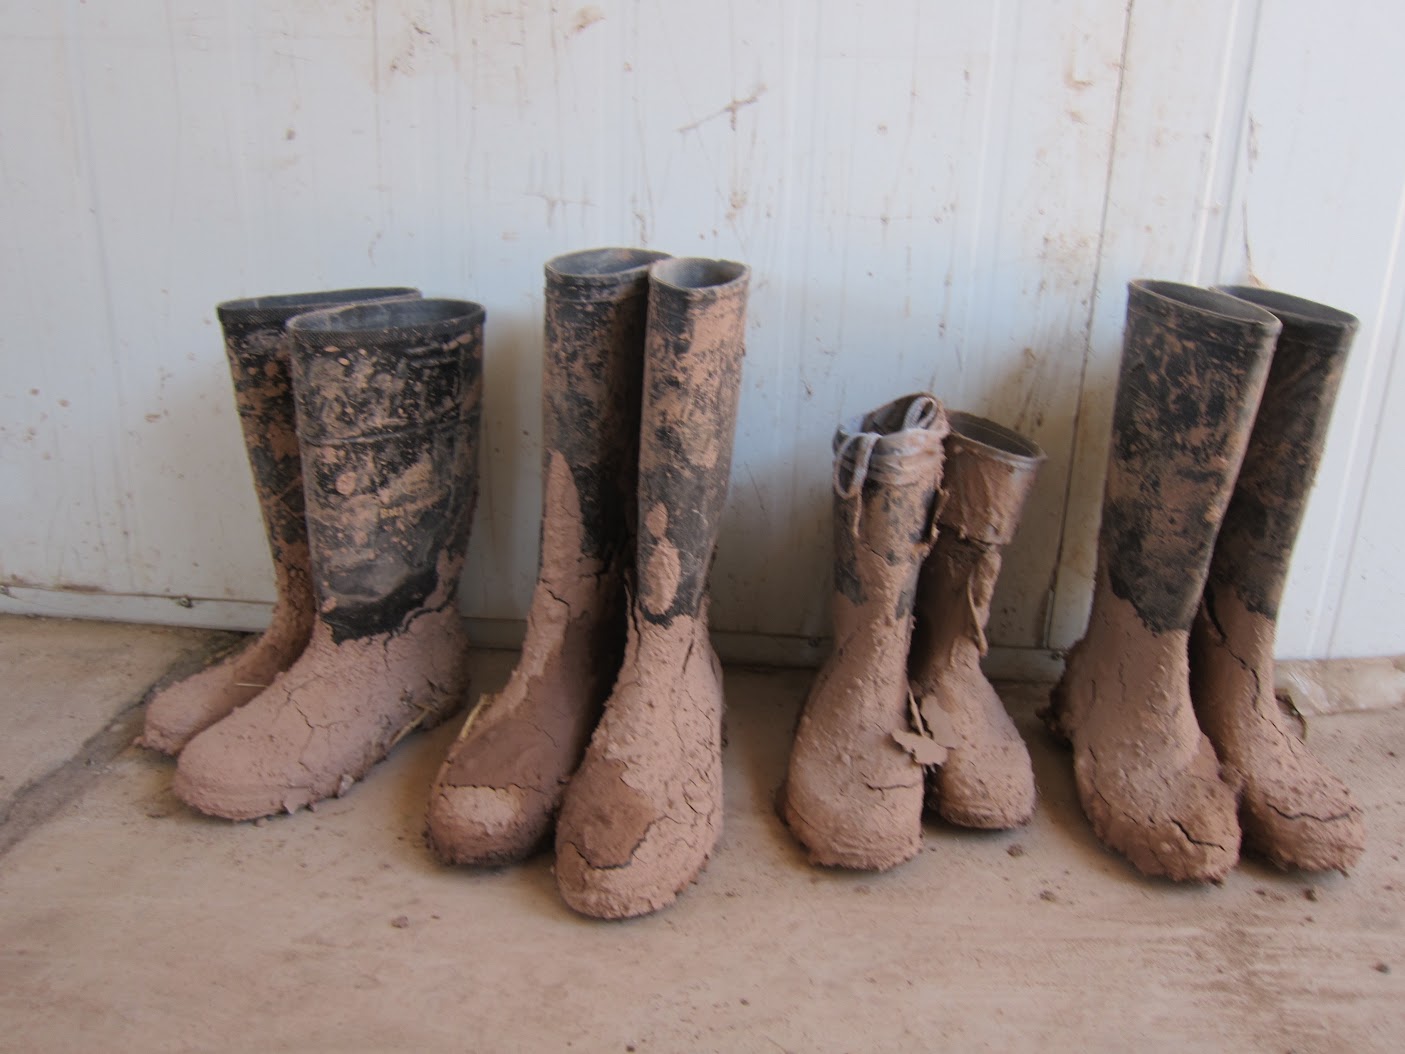 Final picture of the used mud boots